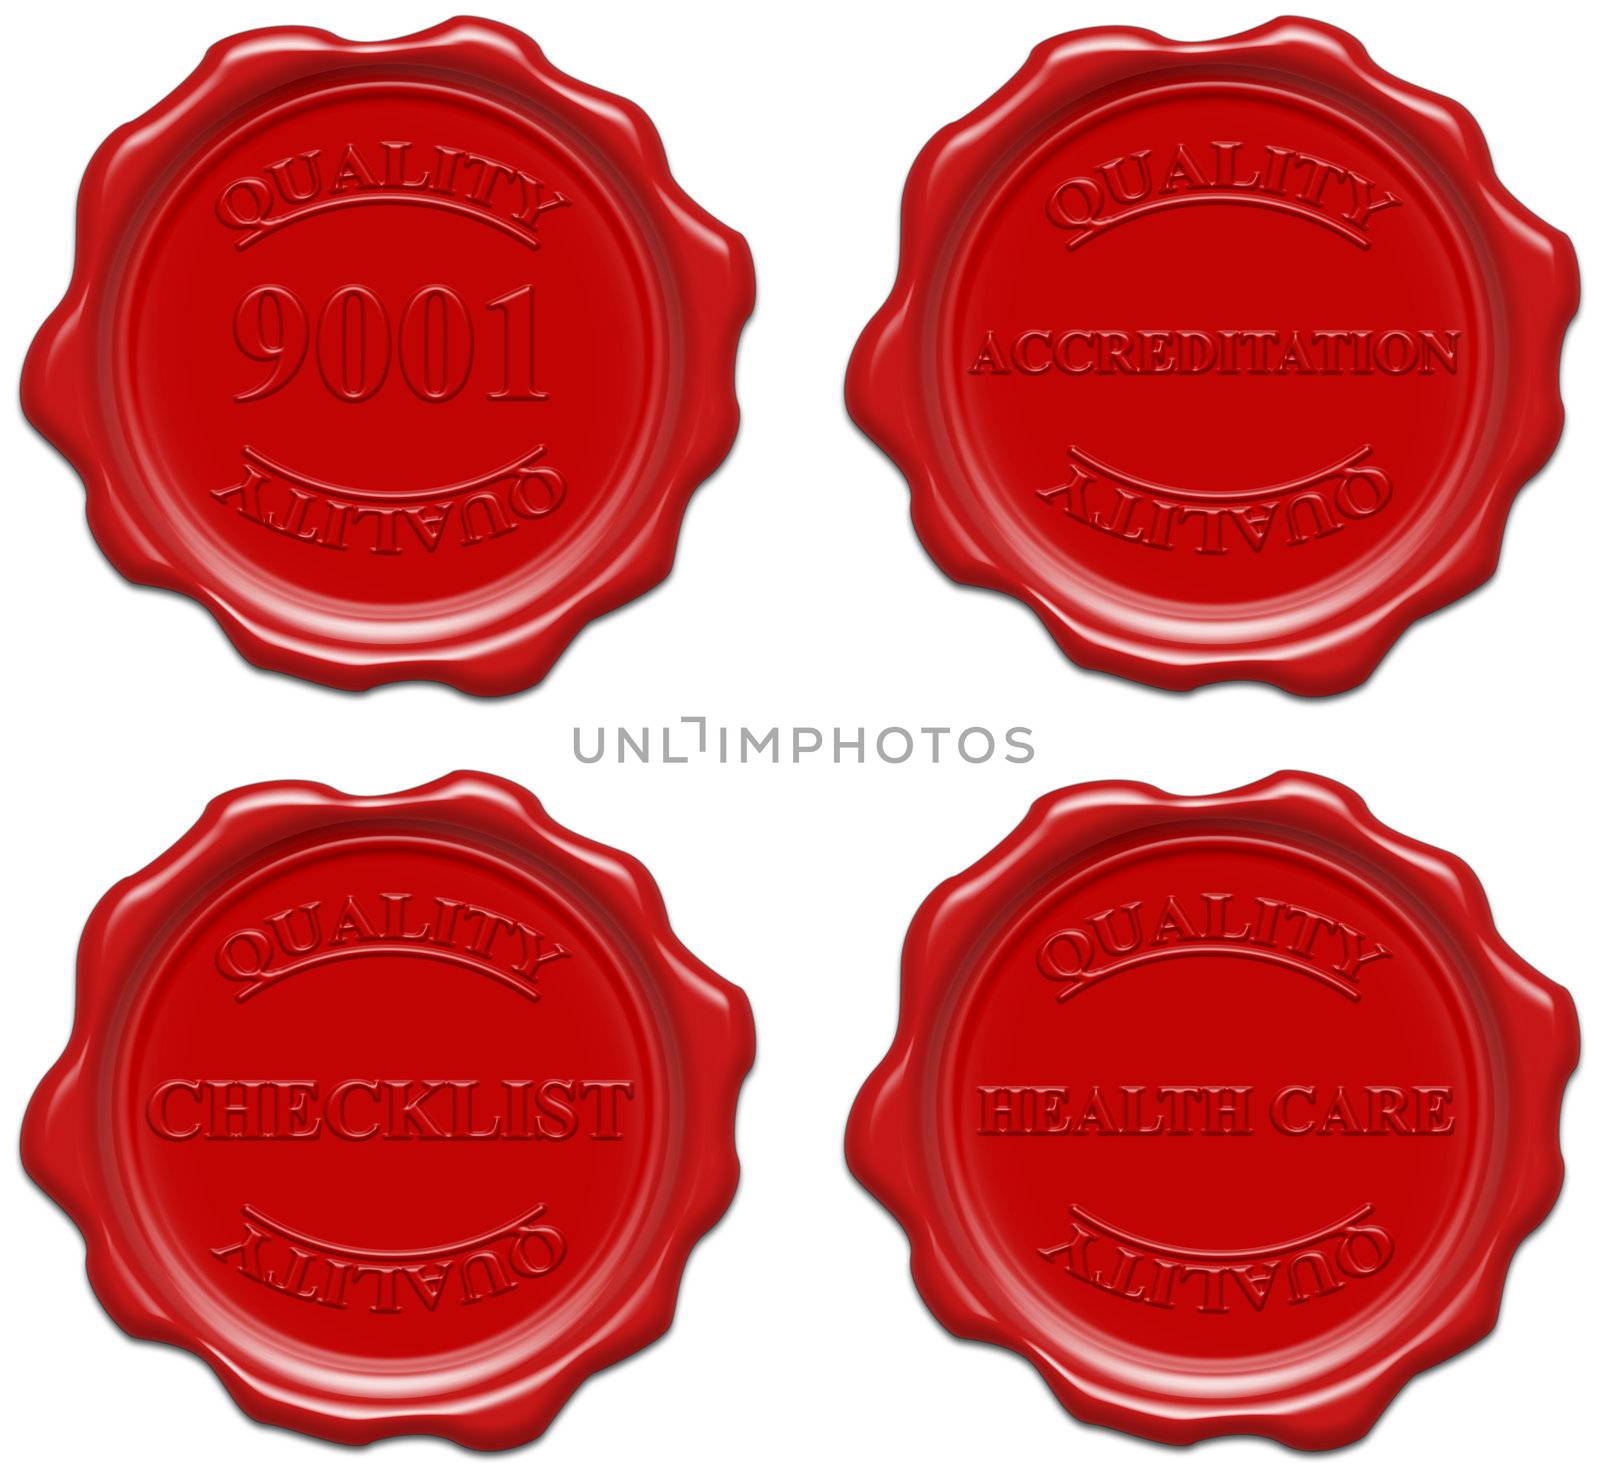 High resolution realistic red wax seal with text : 9001, accreditation, checklist, health care